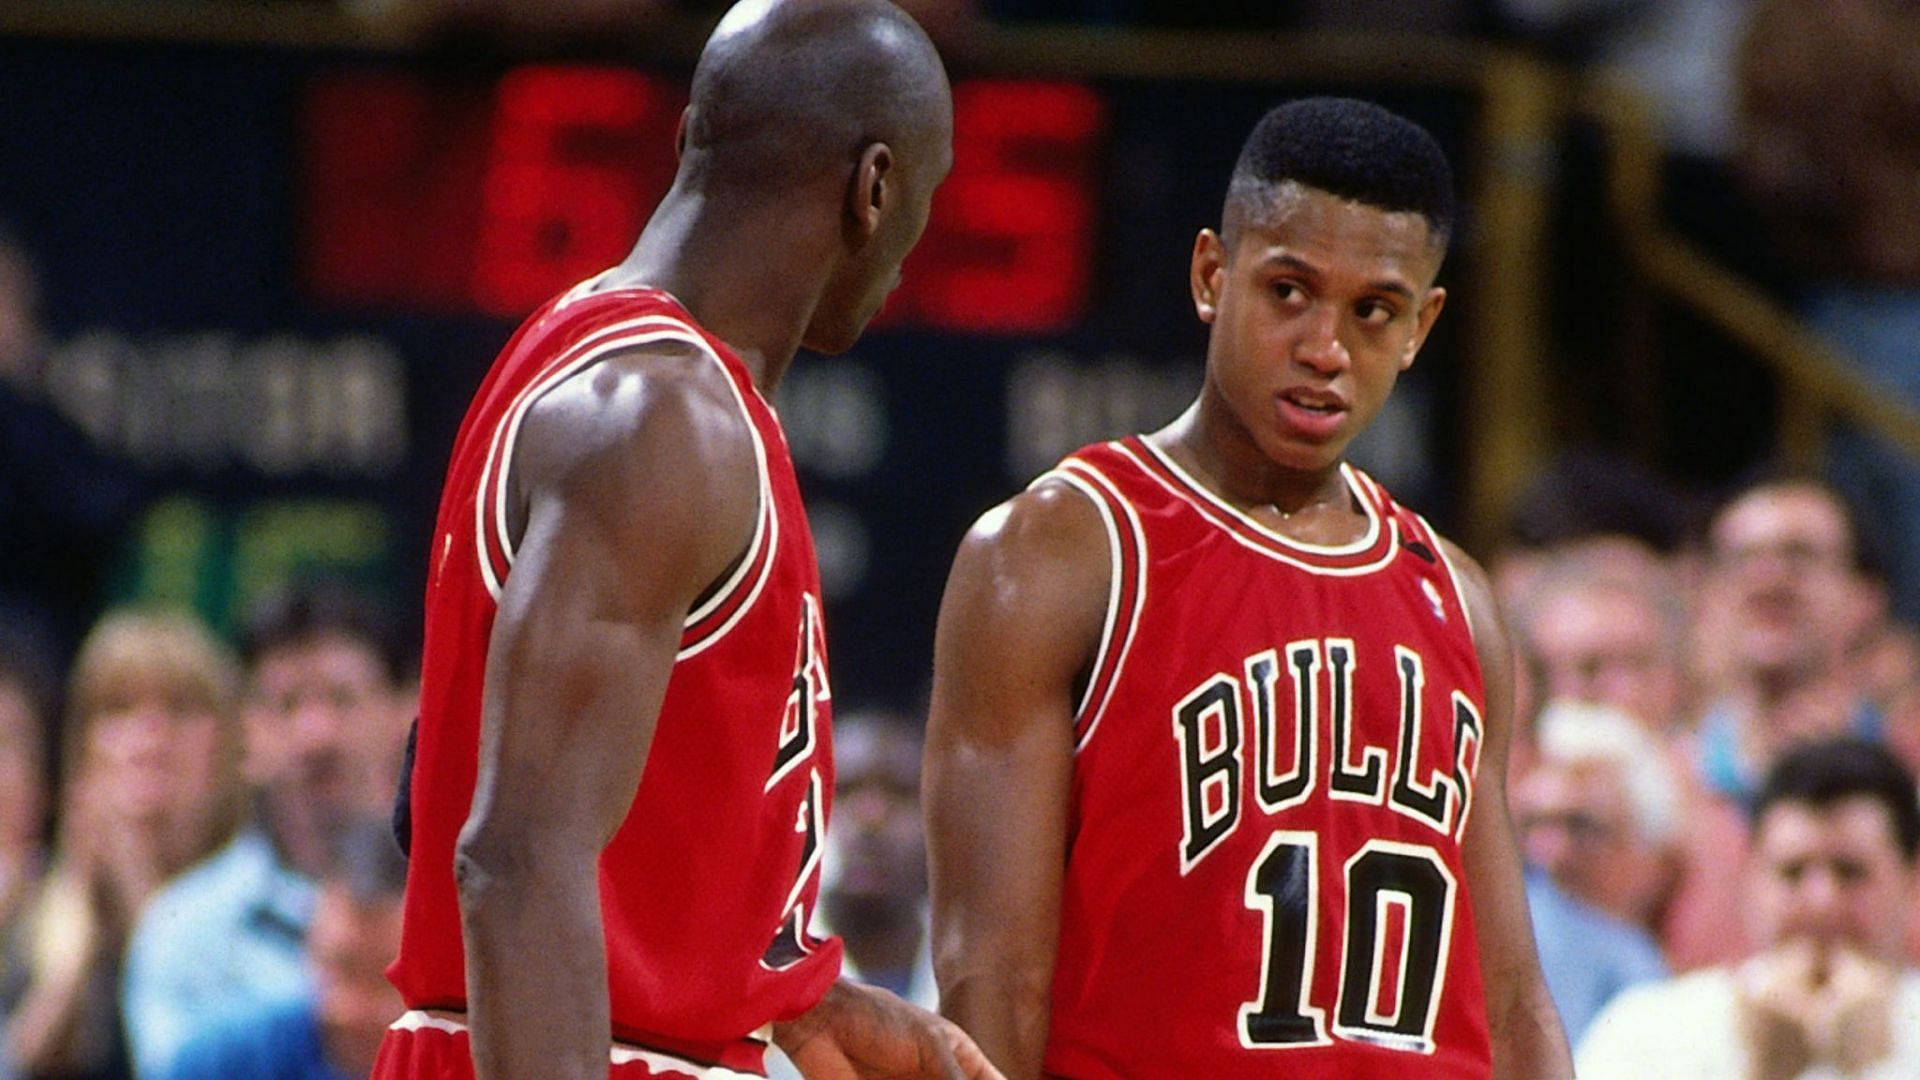 Michael Jordan and B.J. Armstrong (Photo: Courtesy of Sky Sports)